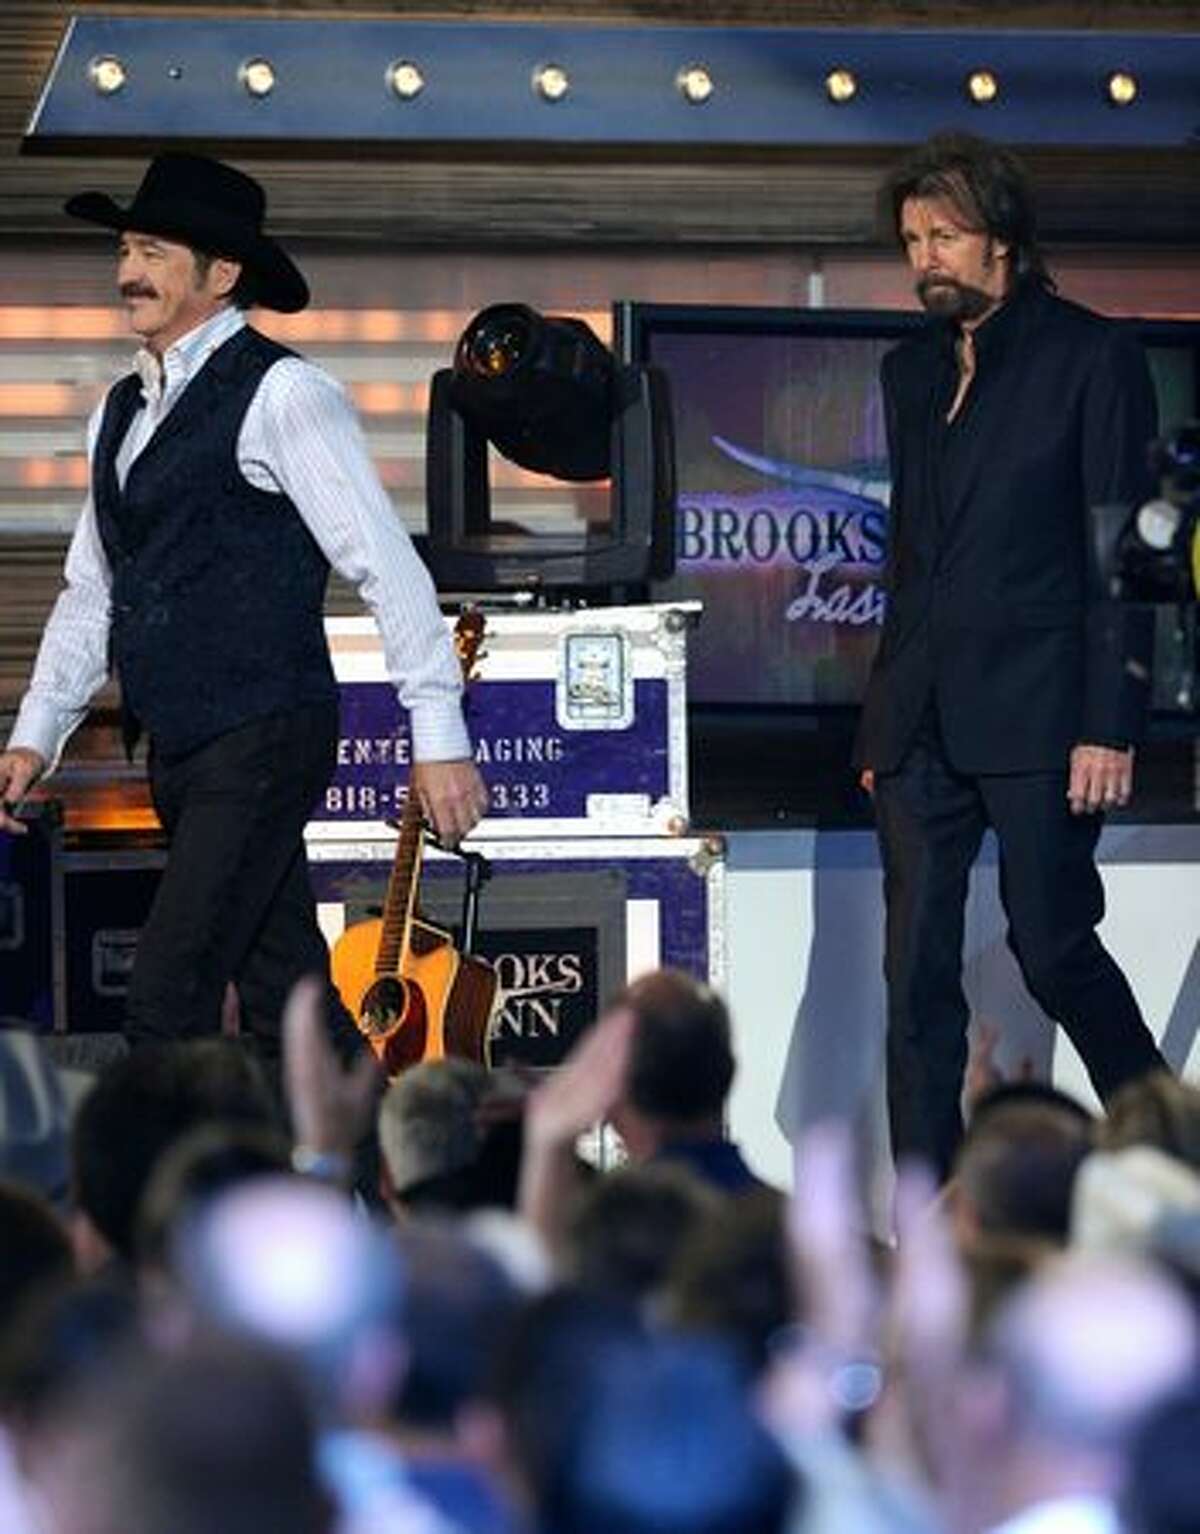 Musicians Kix Brooks (left) and Ronnie Dunn of the band Brooks & Dunn walk onstage.